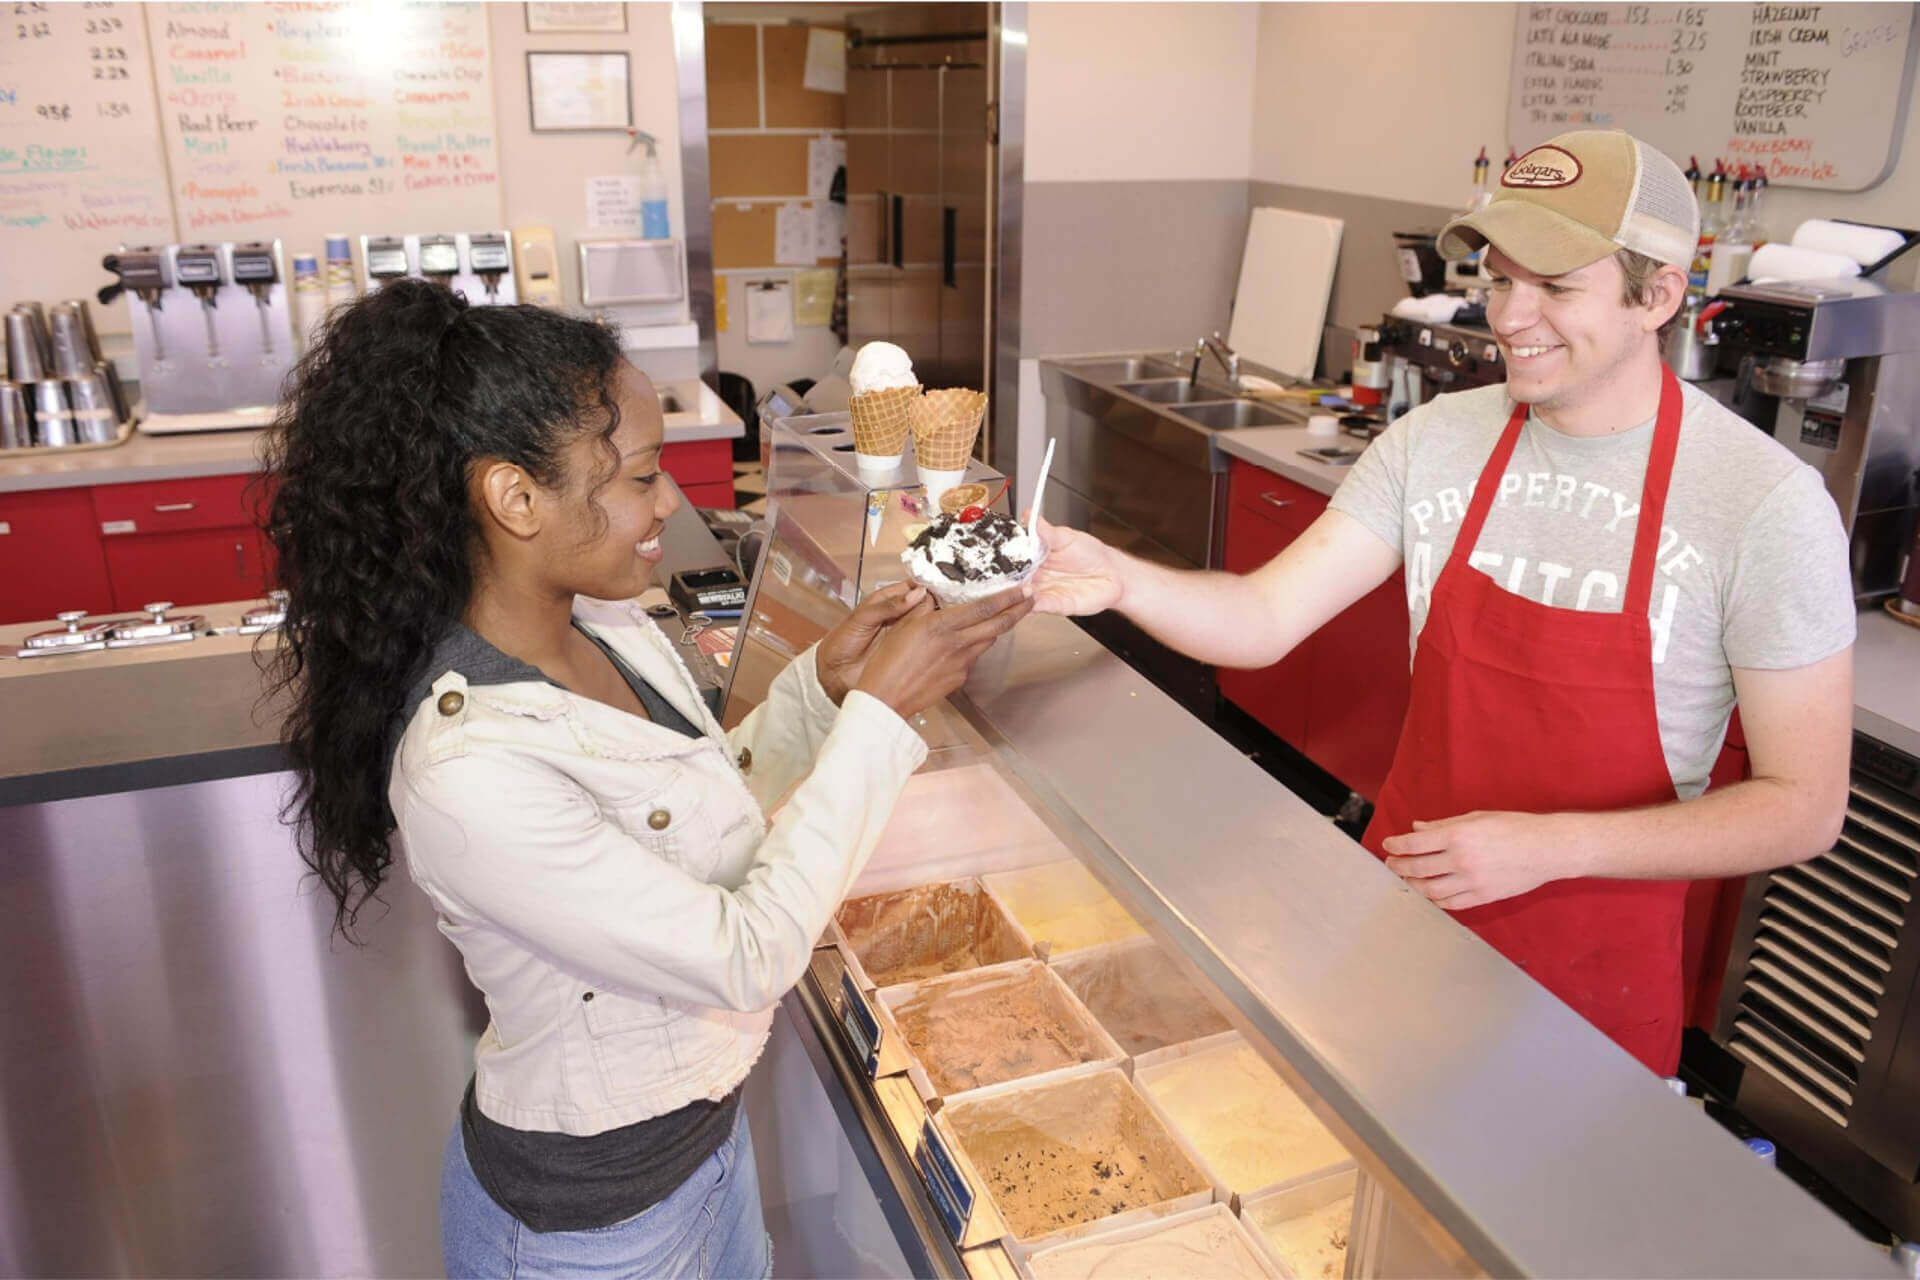 A server hands a customer a scoop of ice cream at Ferdinand's